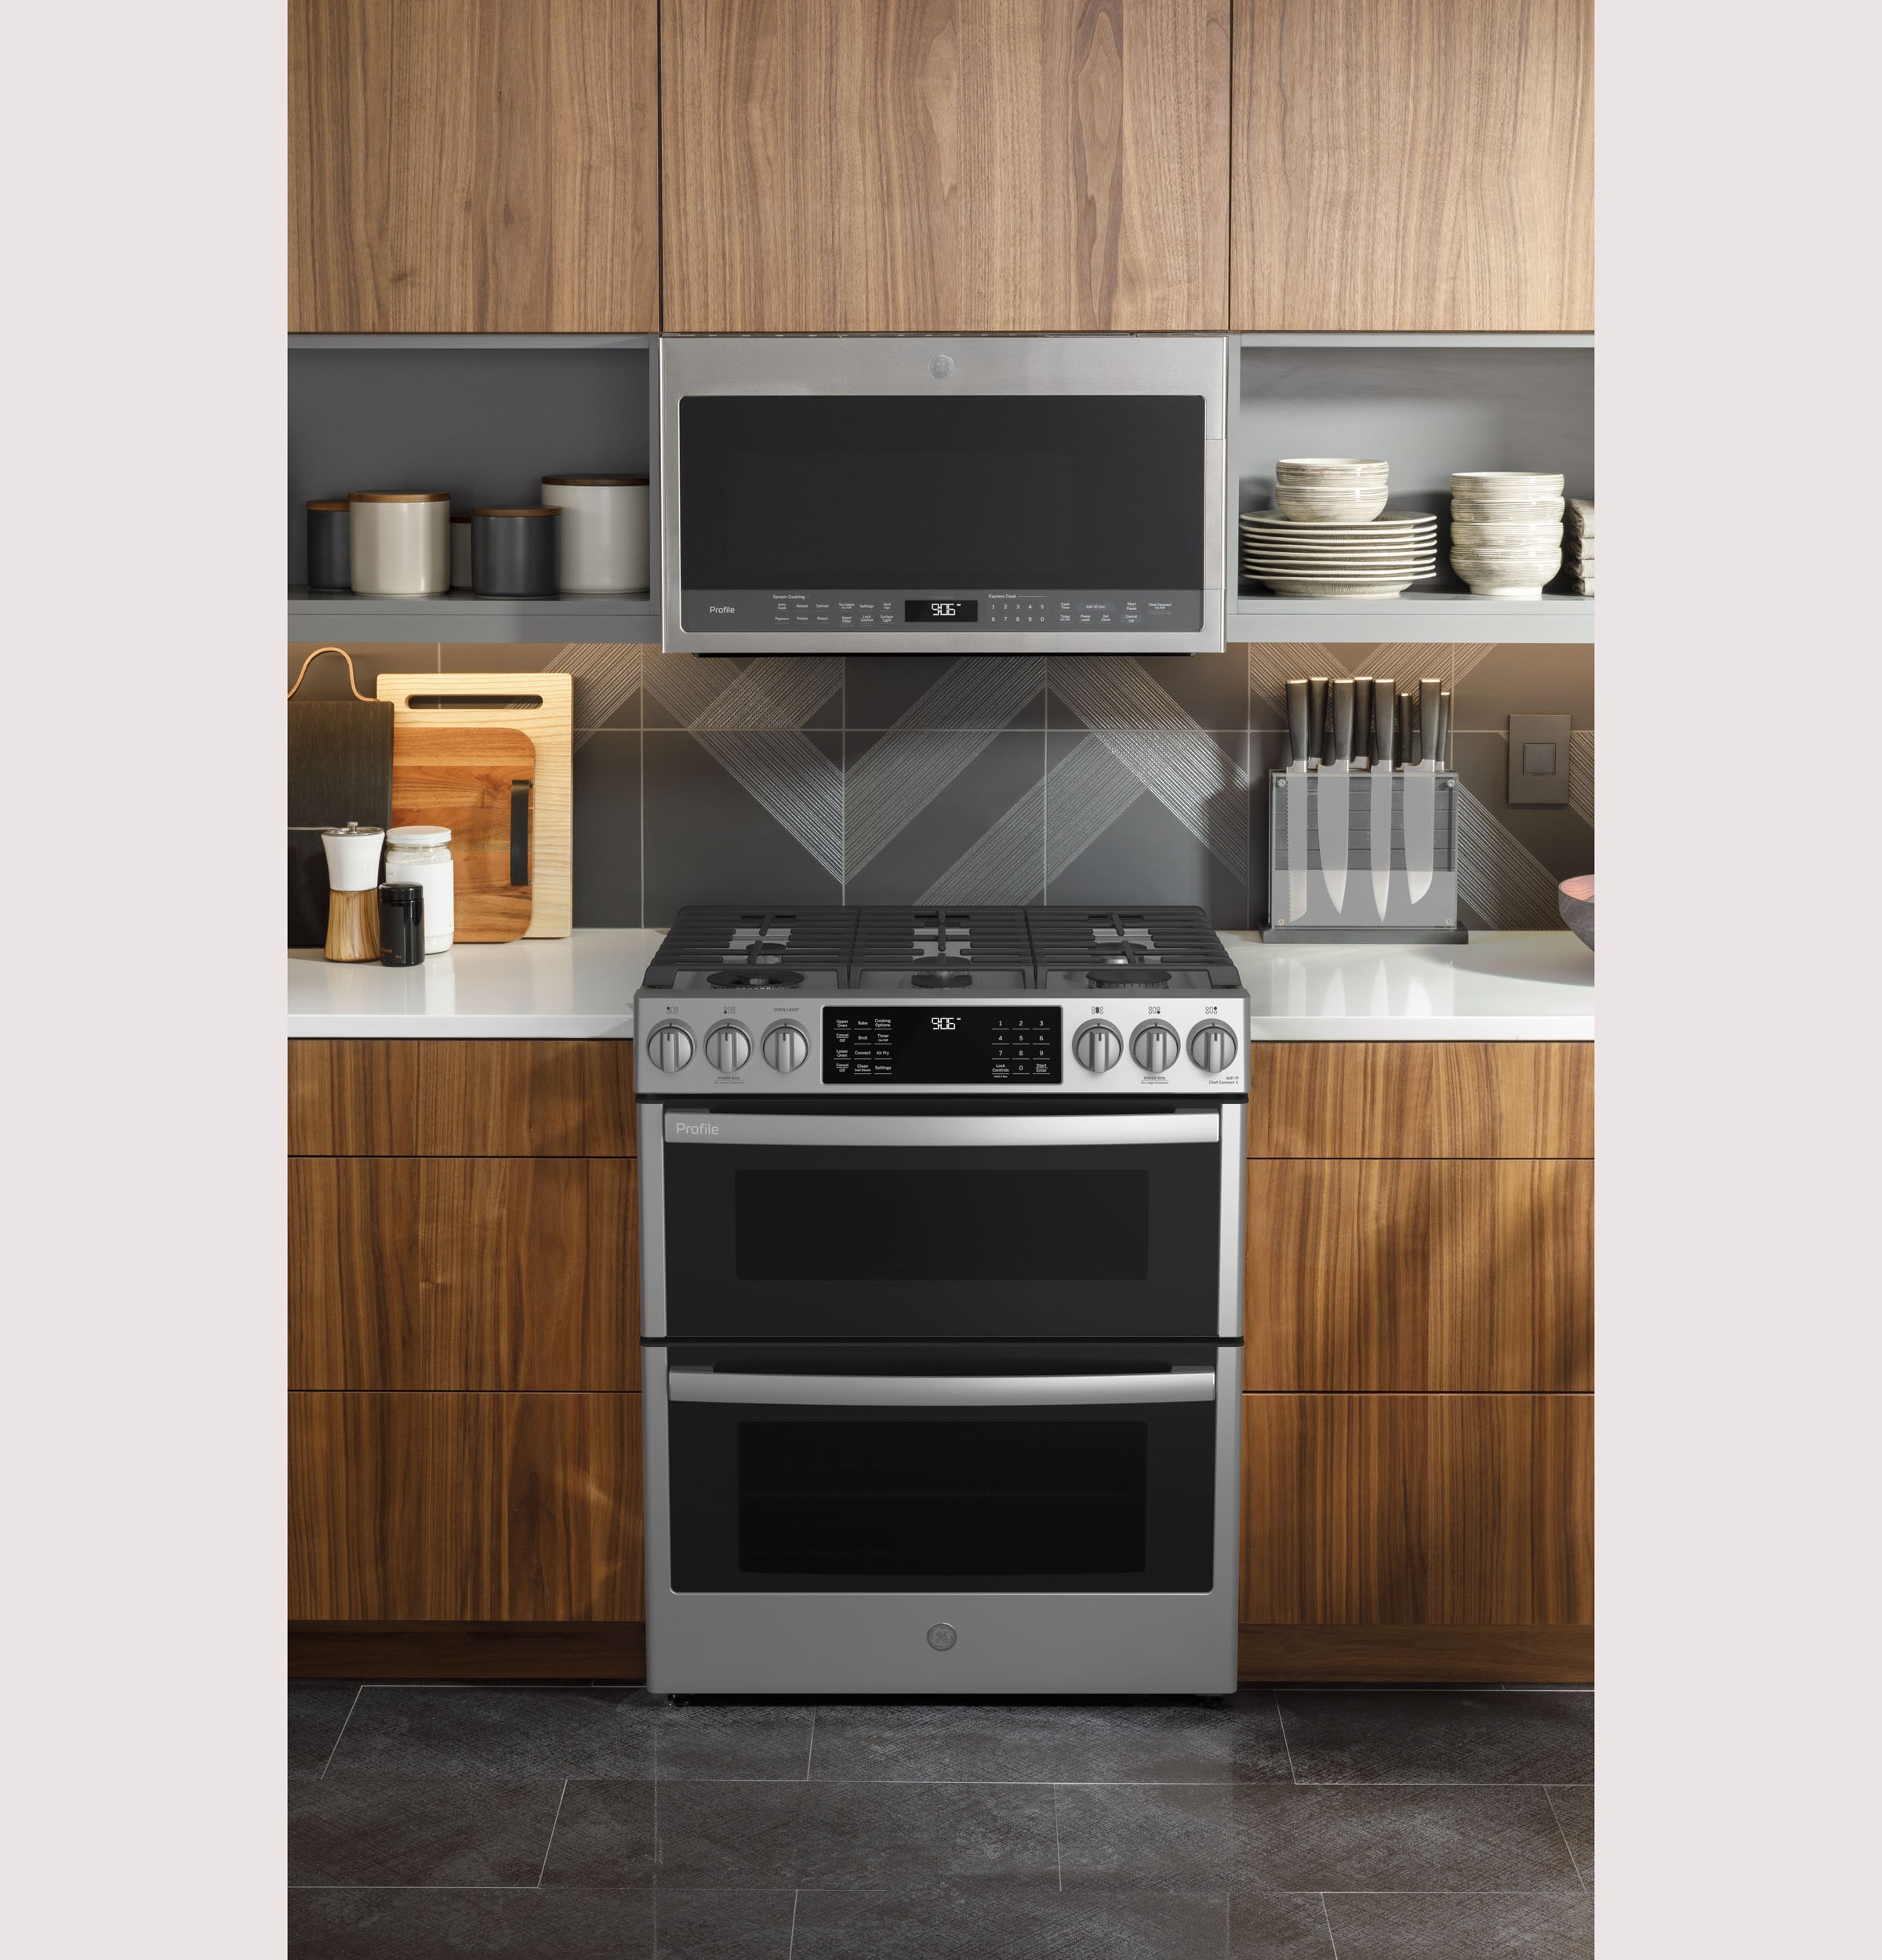 Whirlpool WGG745S0FS 6.0 Cu. Ft. Gas Double Oven Range with Center